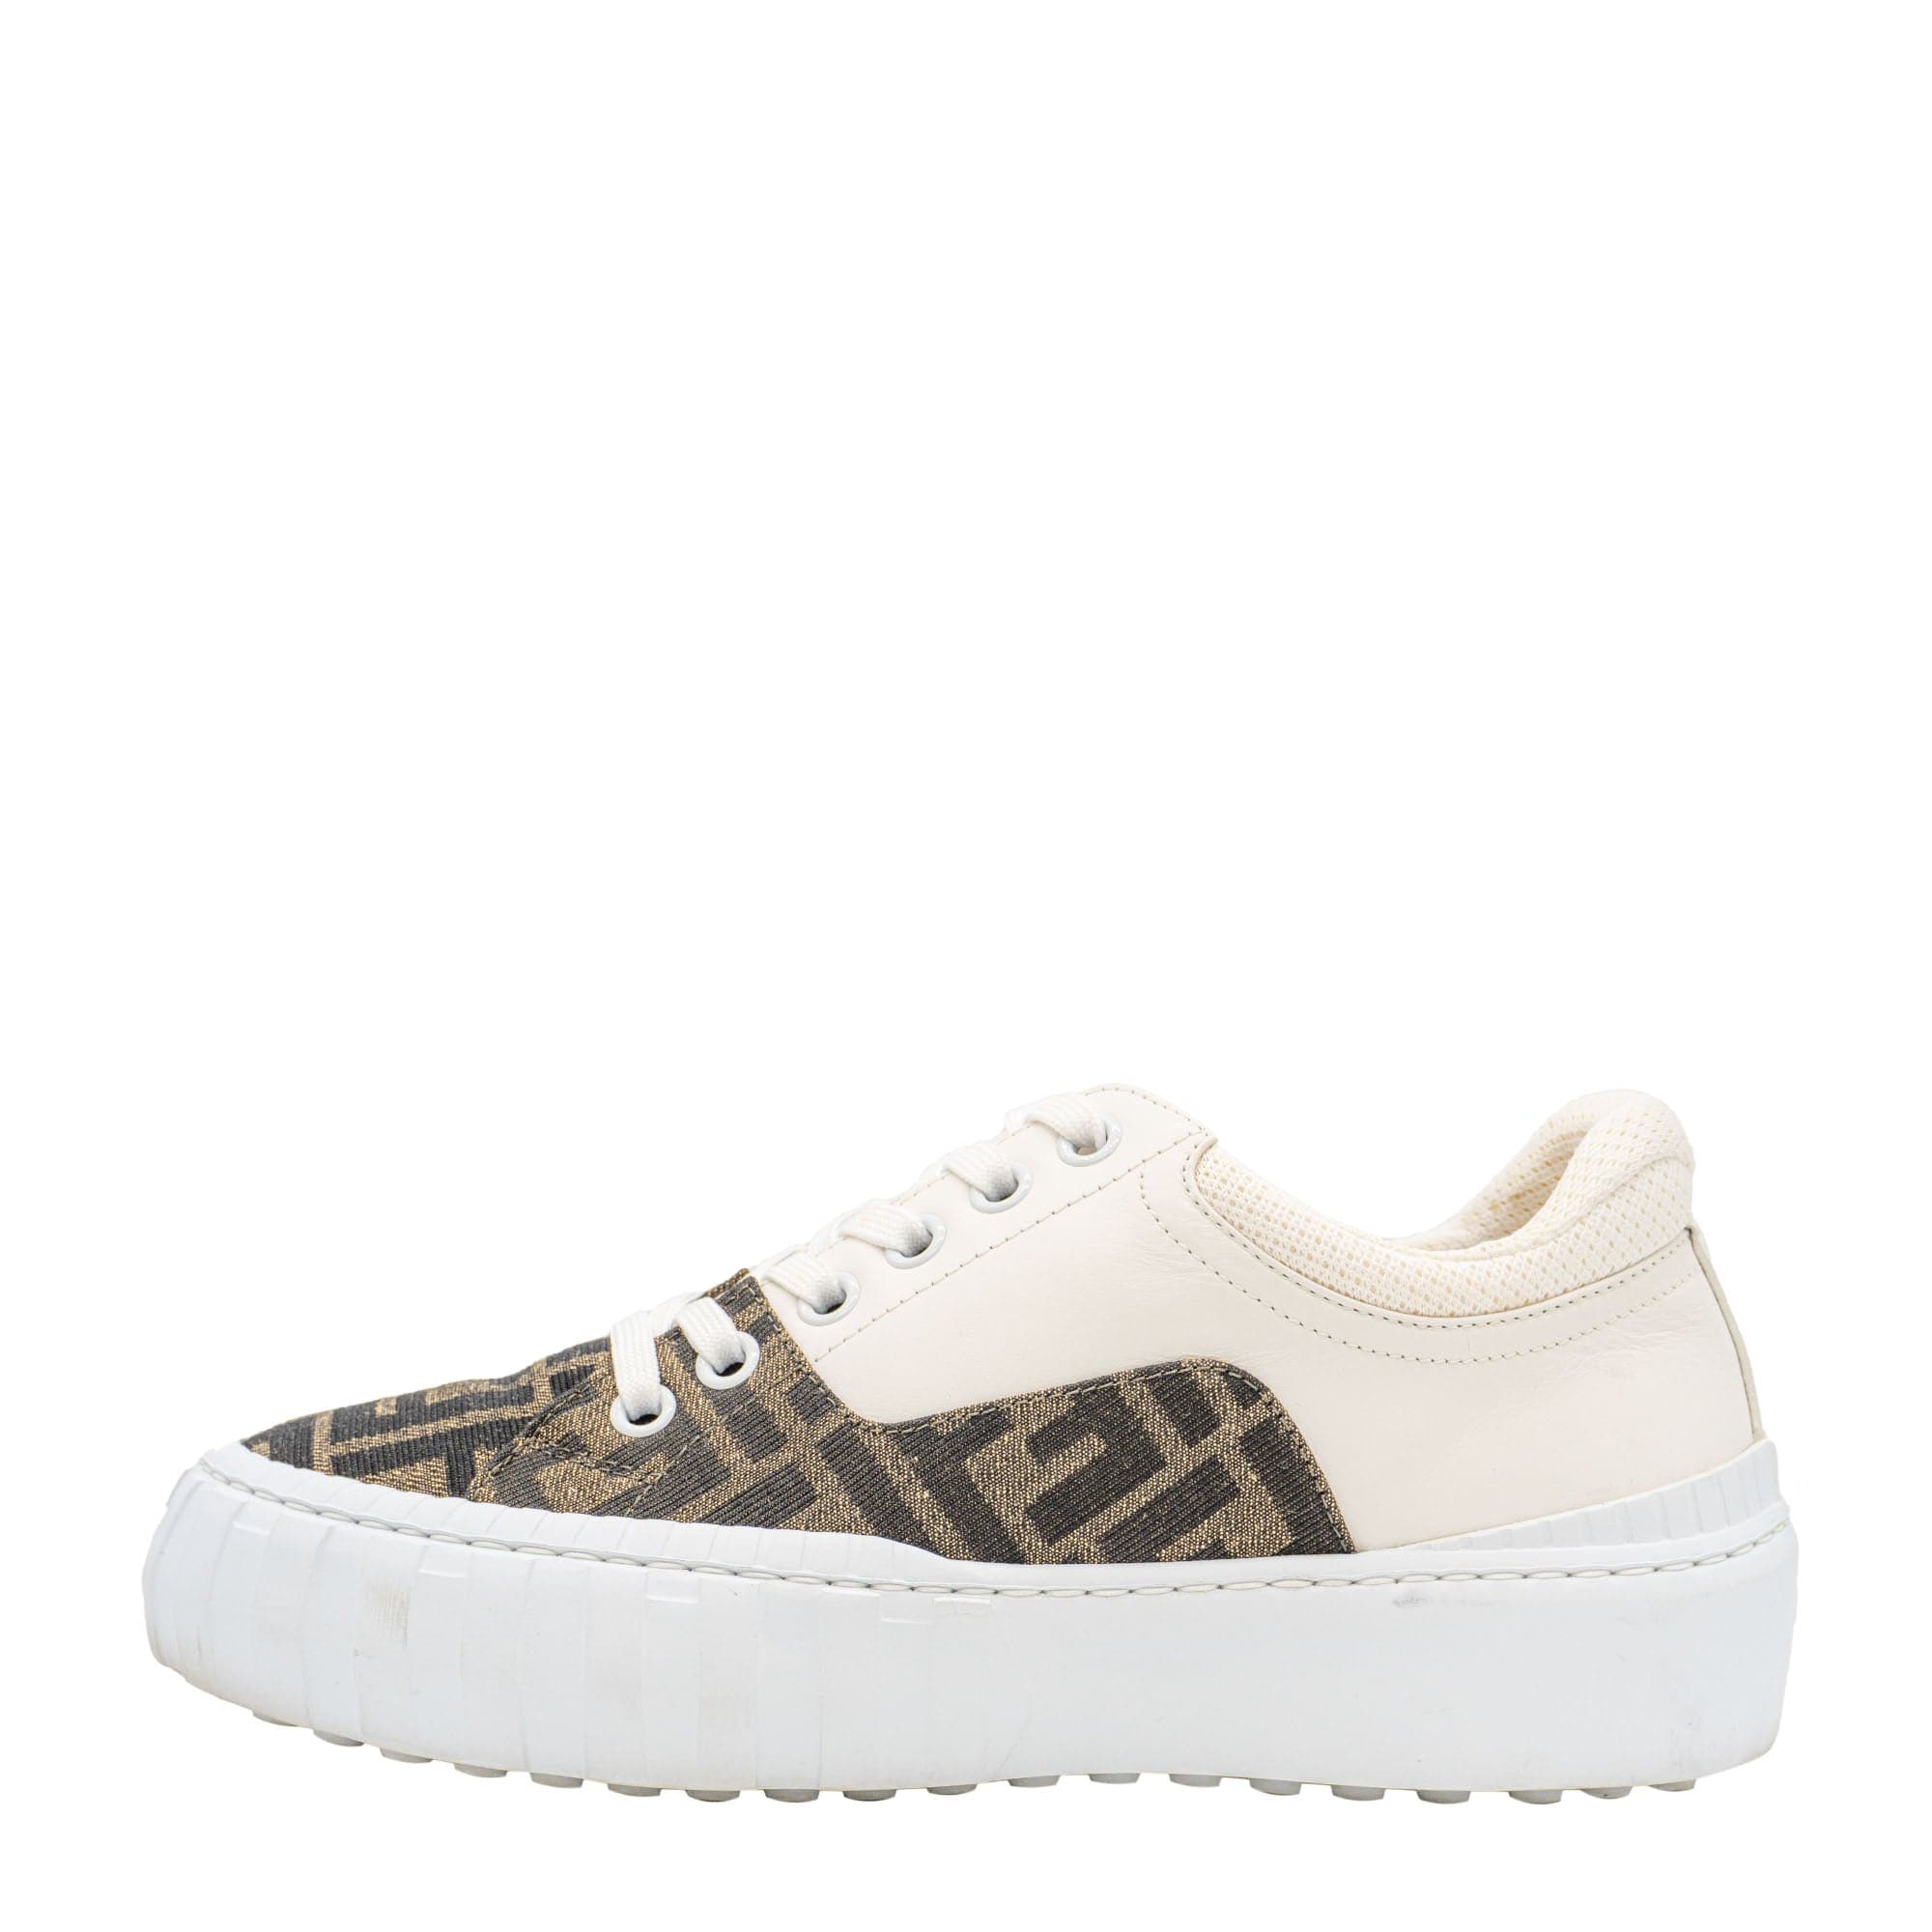 Fendi Fendi Force Leather and FF Canvas Sneakers 6 SYCH044